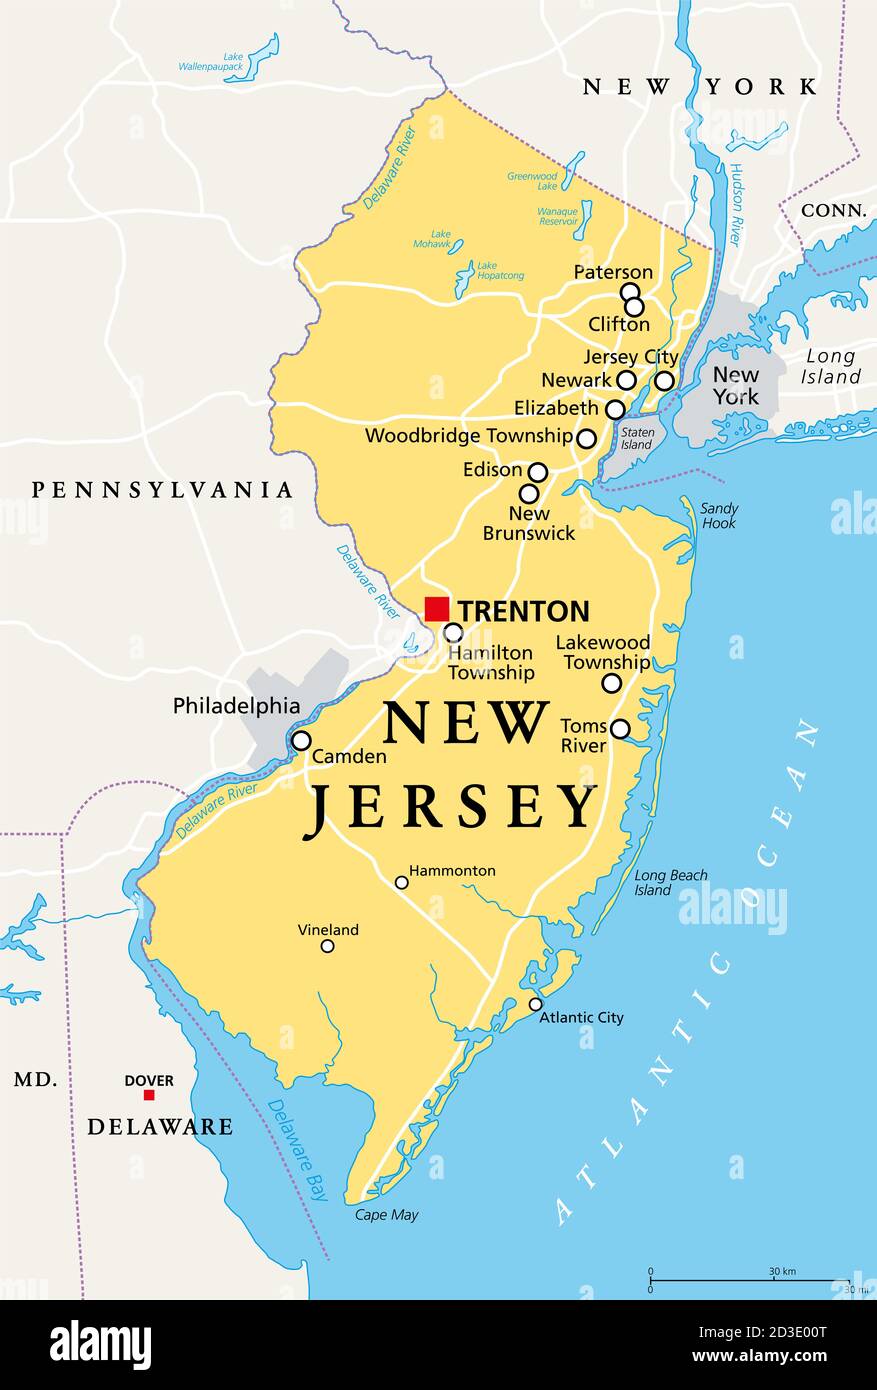 New Jersey, NJ, political map with capital Trenton. State in the Mid-Atlantic region of northeastern United States of America. The Garden State. Stock Photo